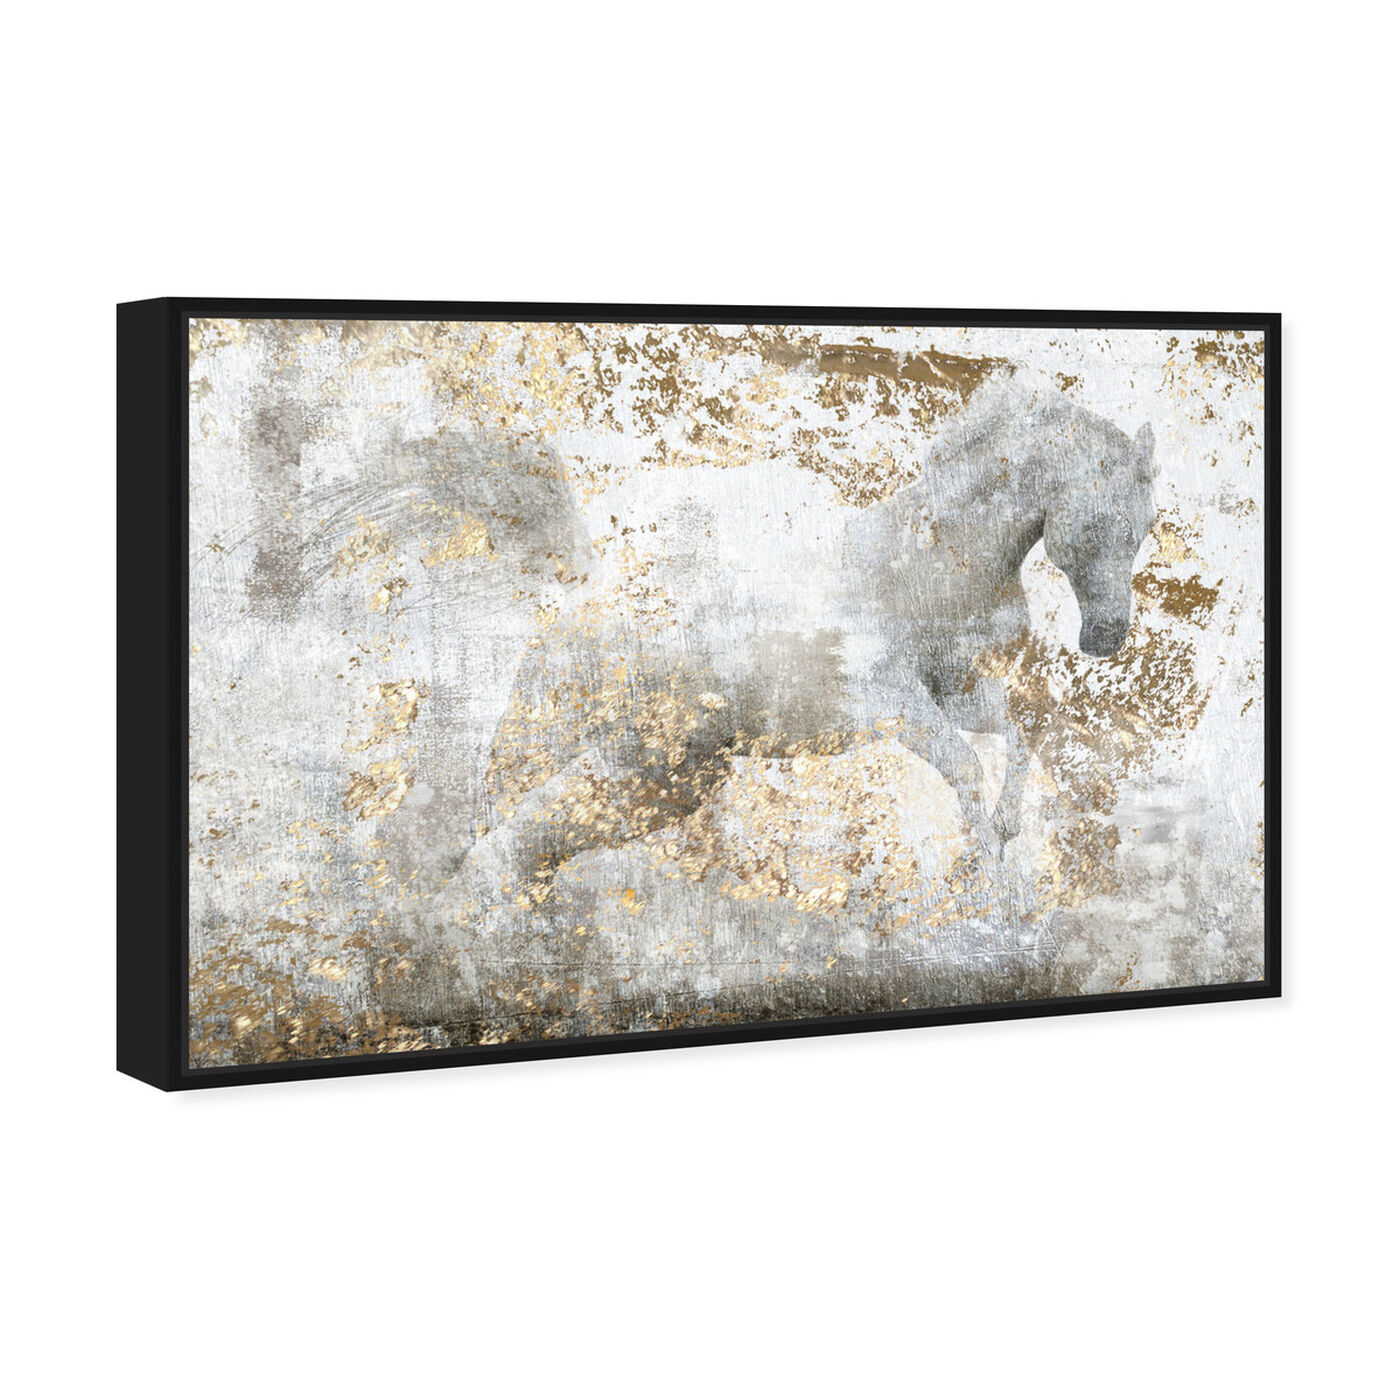 Angled view of Running Equus featuring animals and farm animals art.